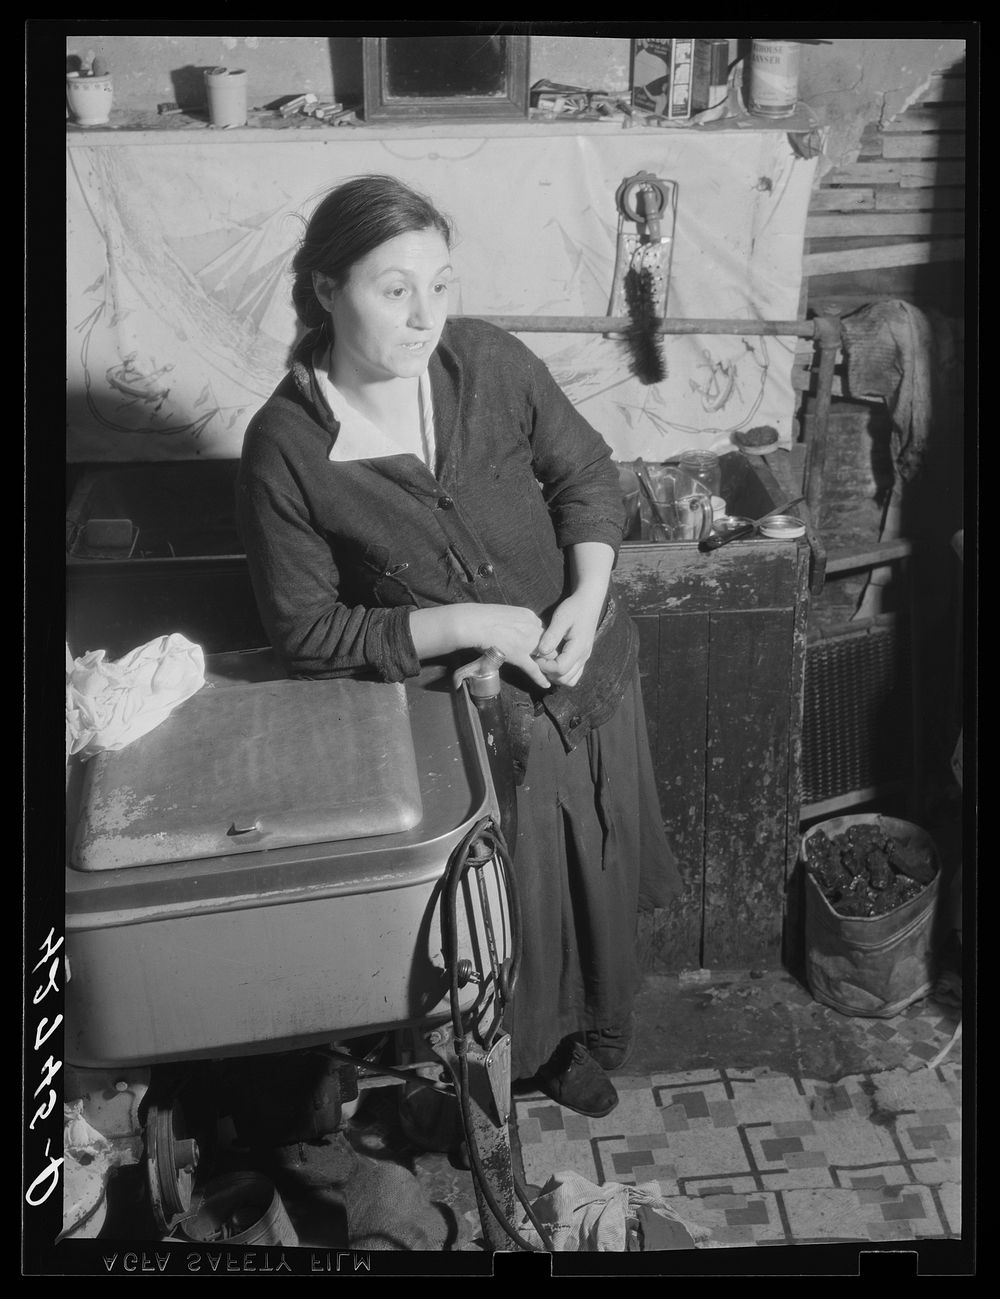 Mrs. M. Vieta, Portuguese wife of a FSA (Farm Security Administration) client. At present she is looking after the farm and…